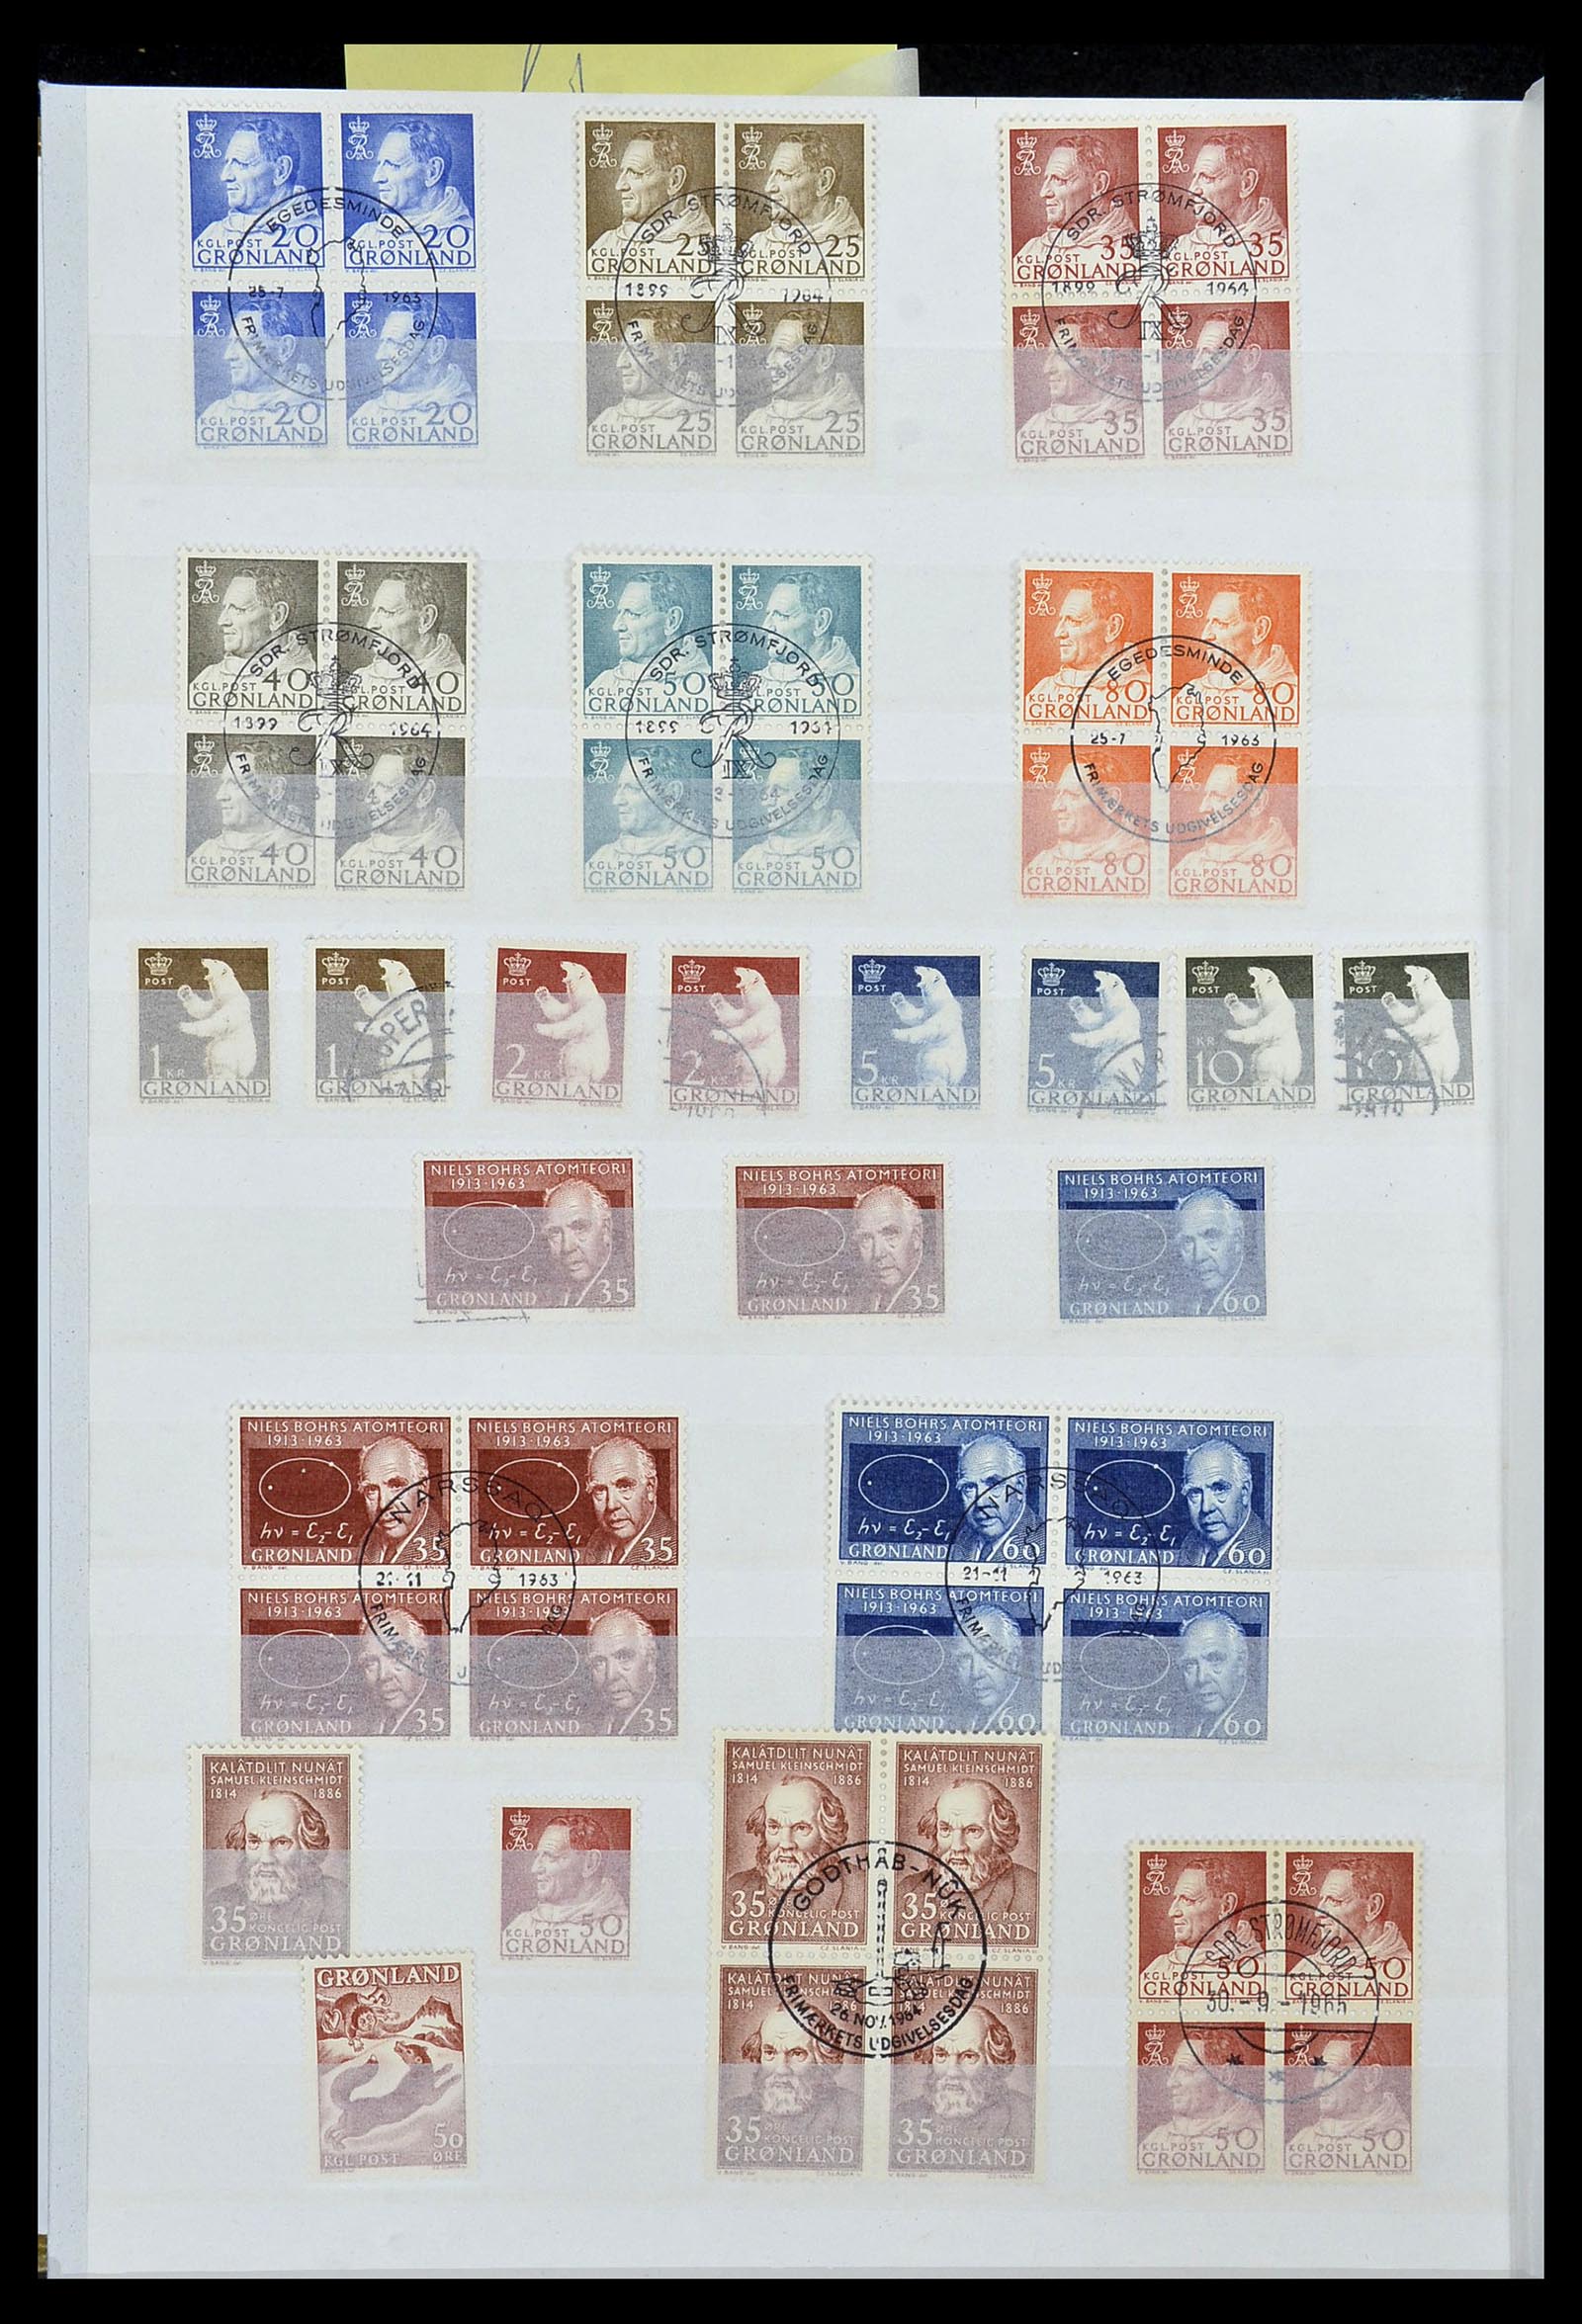 33845 004 - Stamp collection 33845 Greenland 1938-2014!